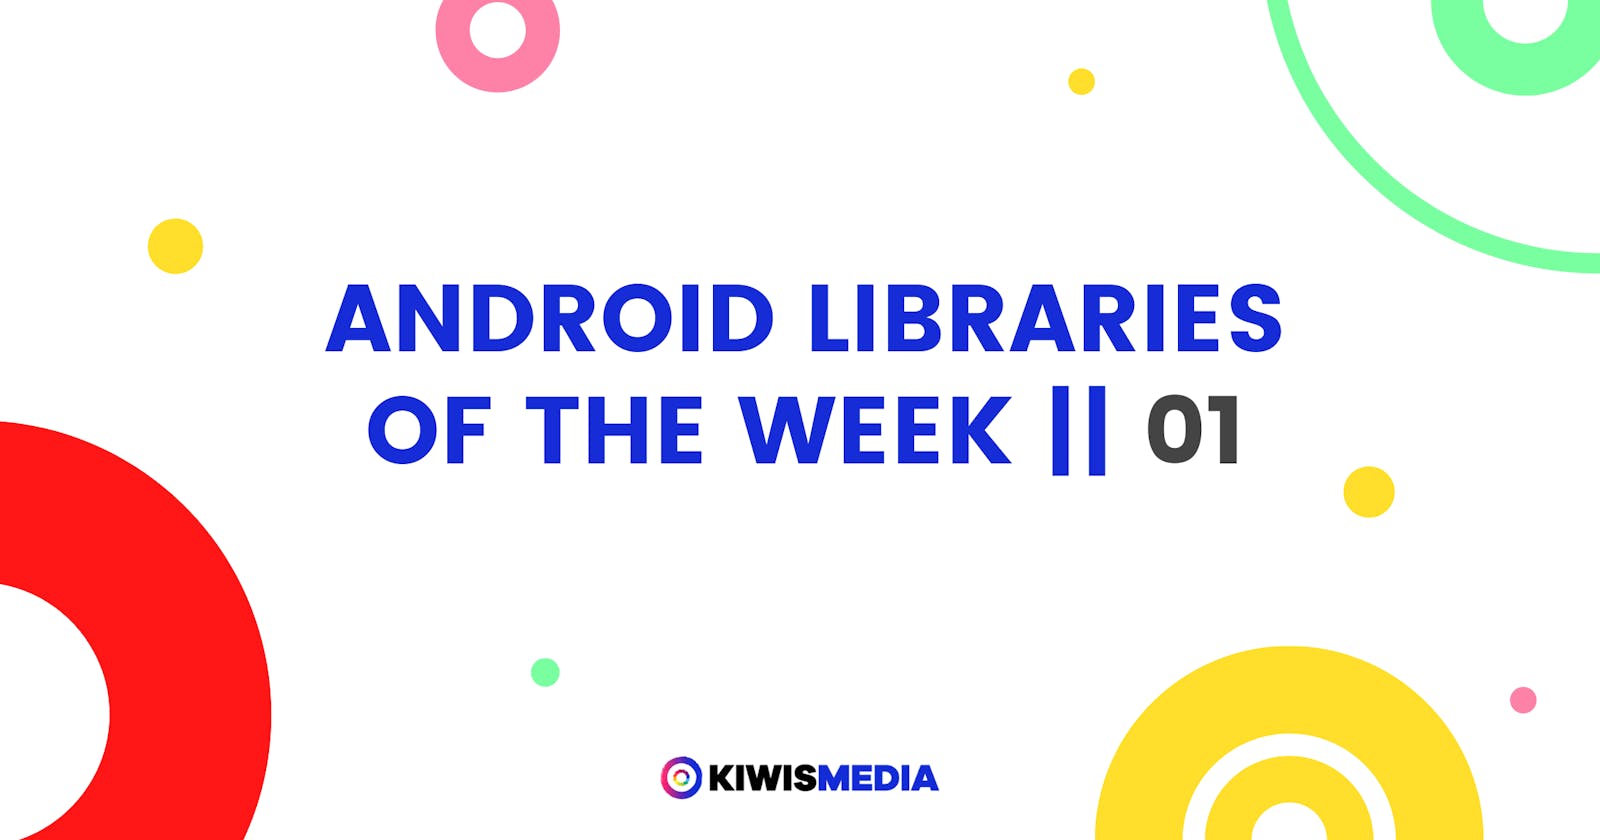 Android Libraries of the Week || 01